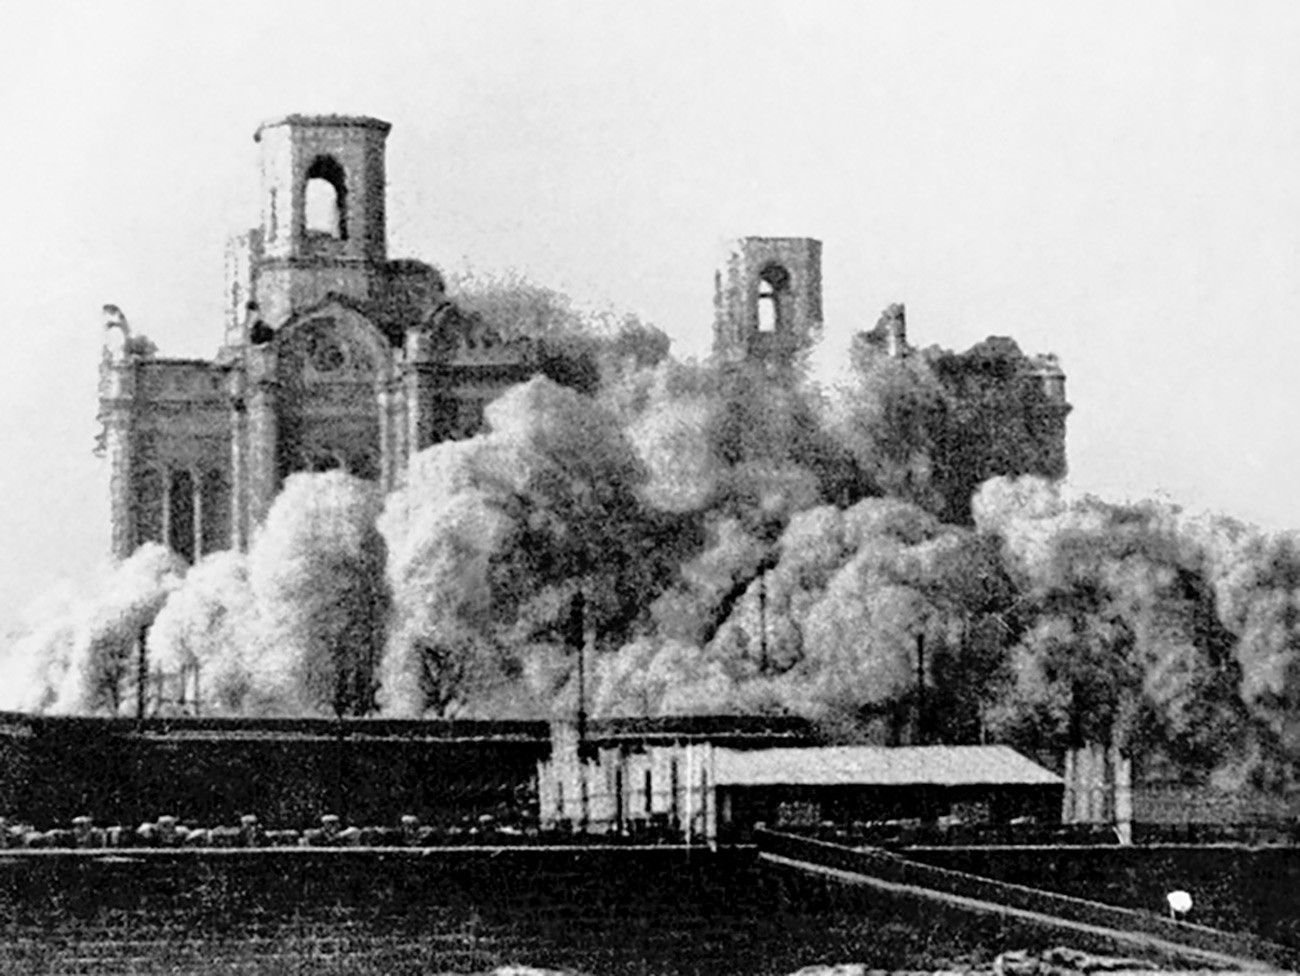 Blowing up the Cathedral of Christ the Savior in 1931.